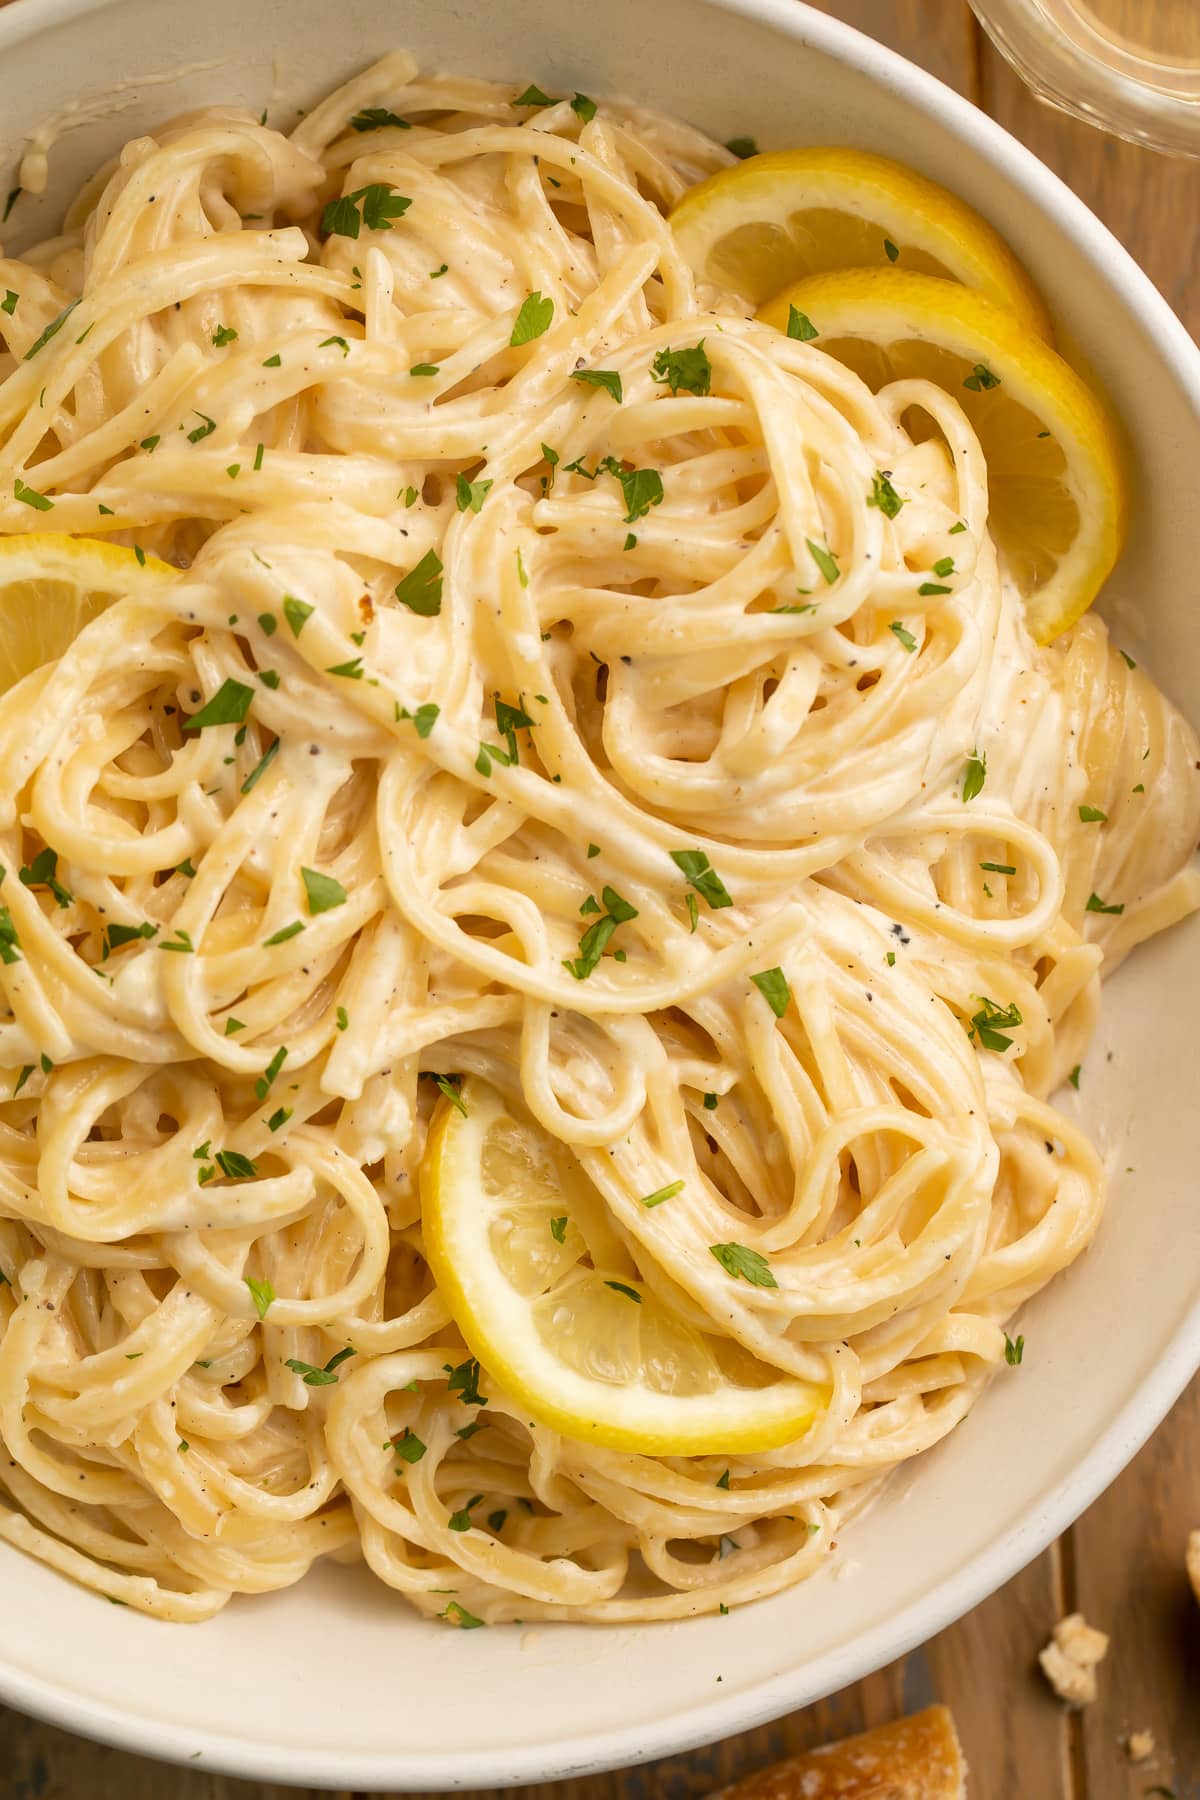 A bowl of lemon pepper pasta made with spaghetti noodles and garnished with lemon wedges.